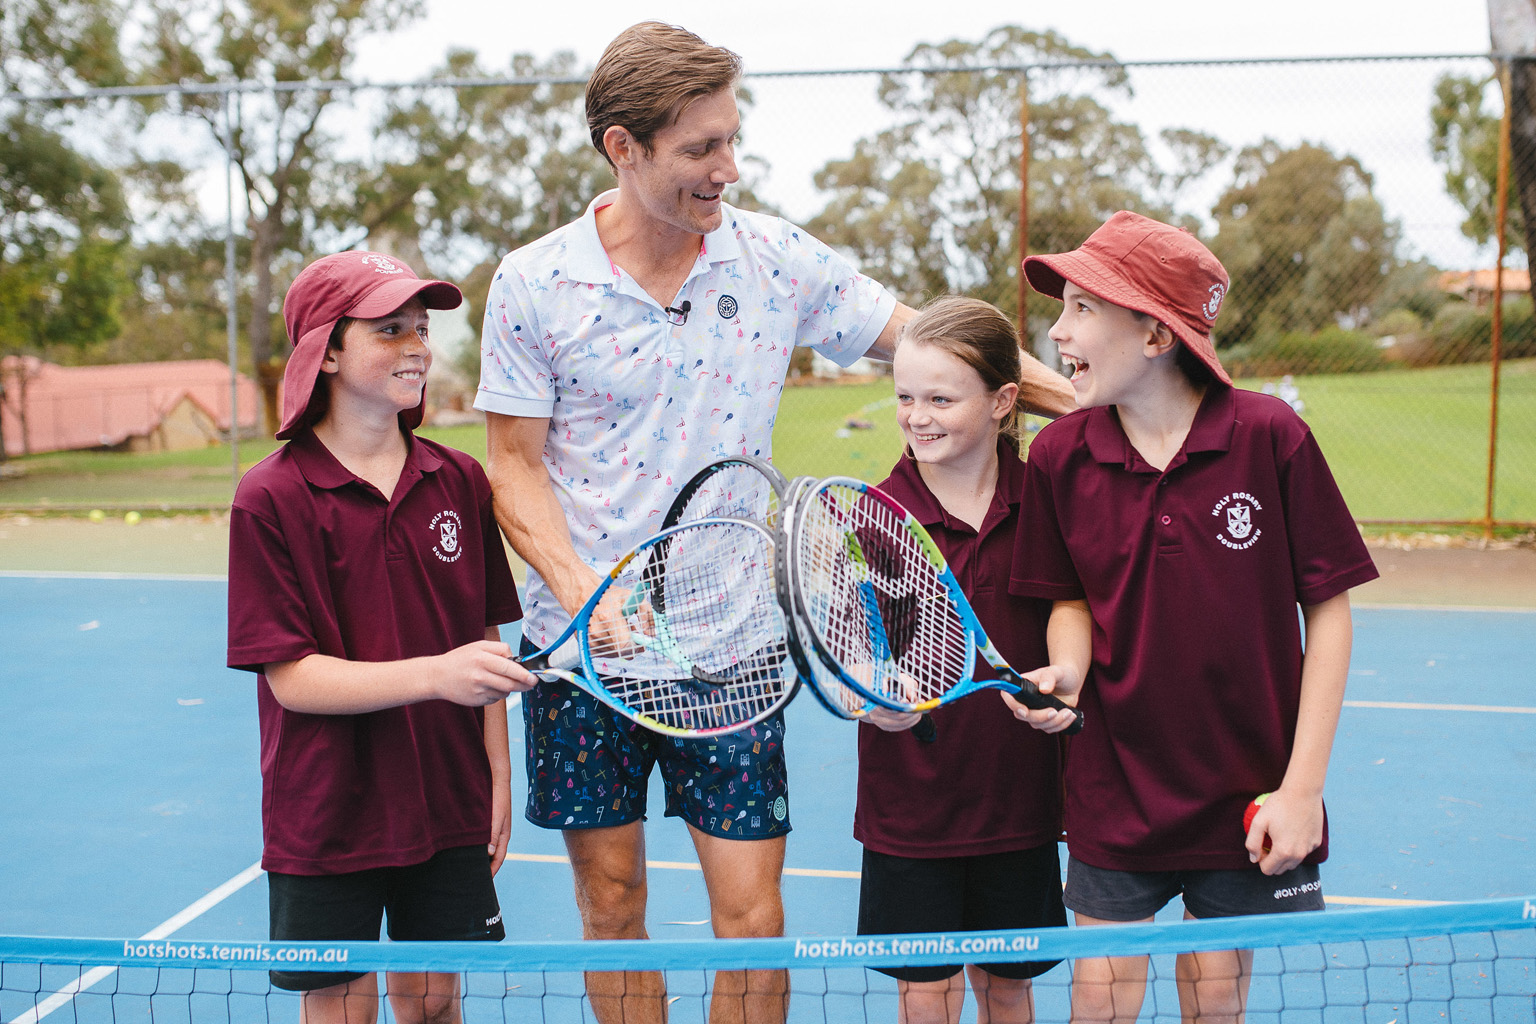 Tennis player Matt Ebden and school students stand together on a tennis court holding racquets.